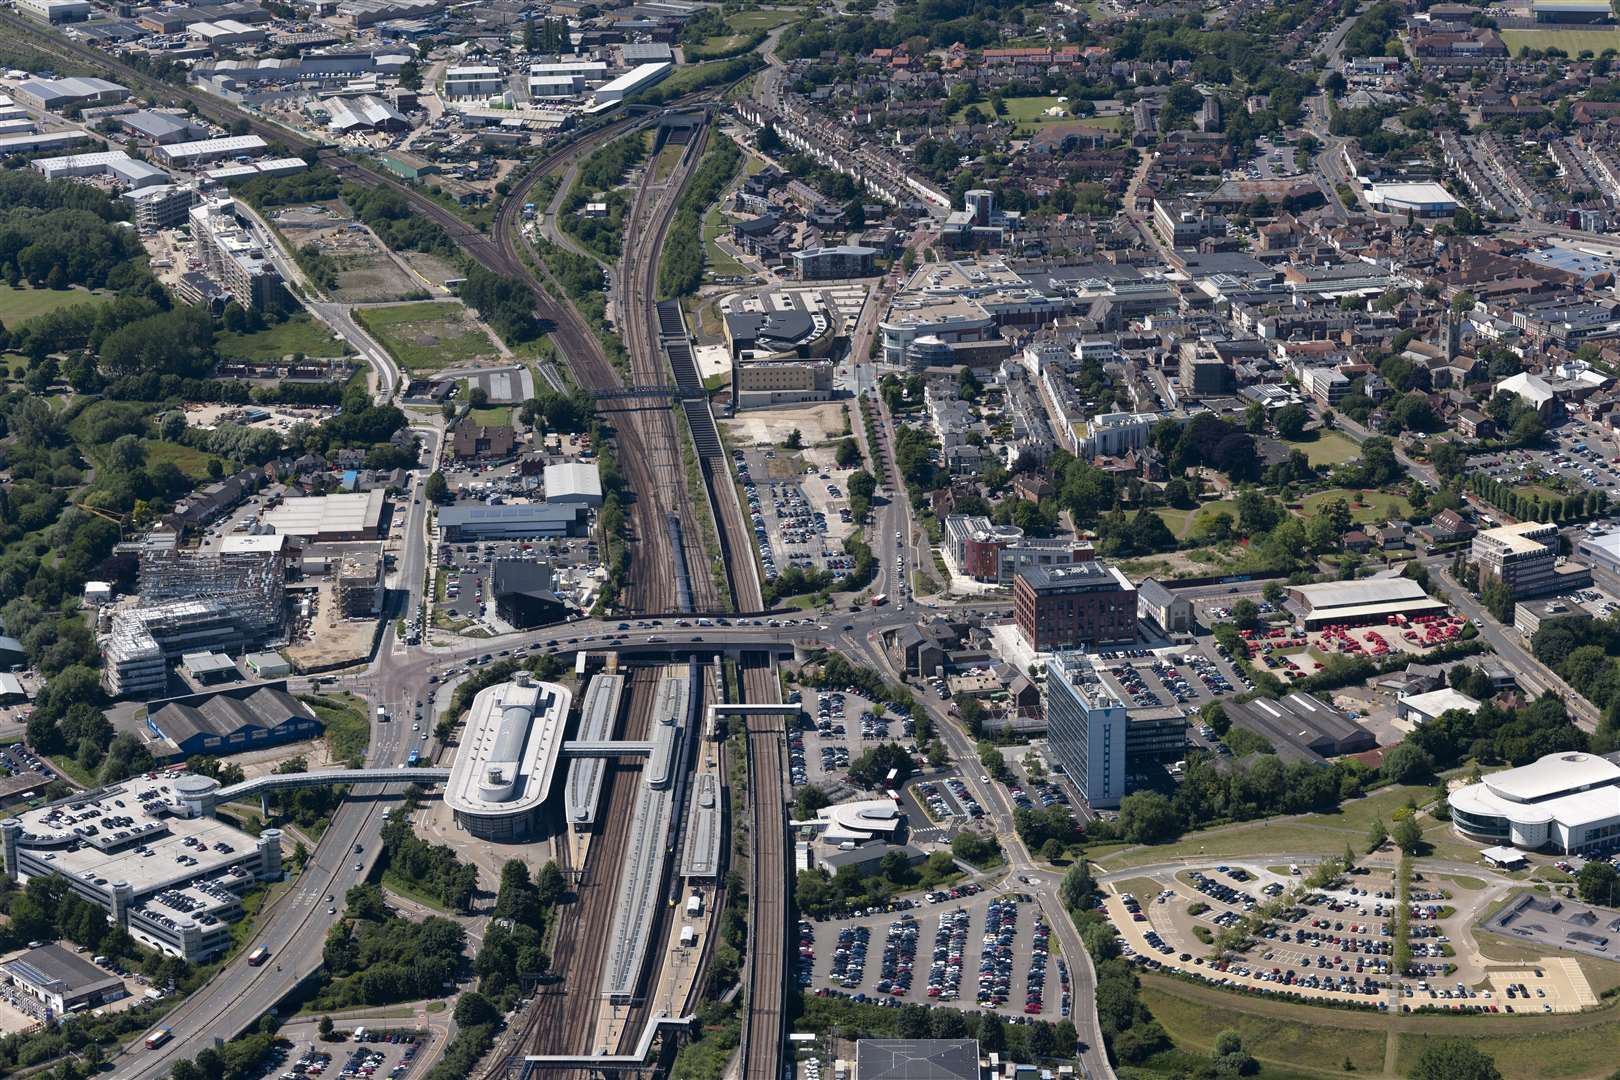 Ashford International station has become surrounded by developments in recent years, with its direct links to London on the high-speed line drawing developers to the area. Picture: Ady Kerry/Ashford Borough Council